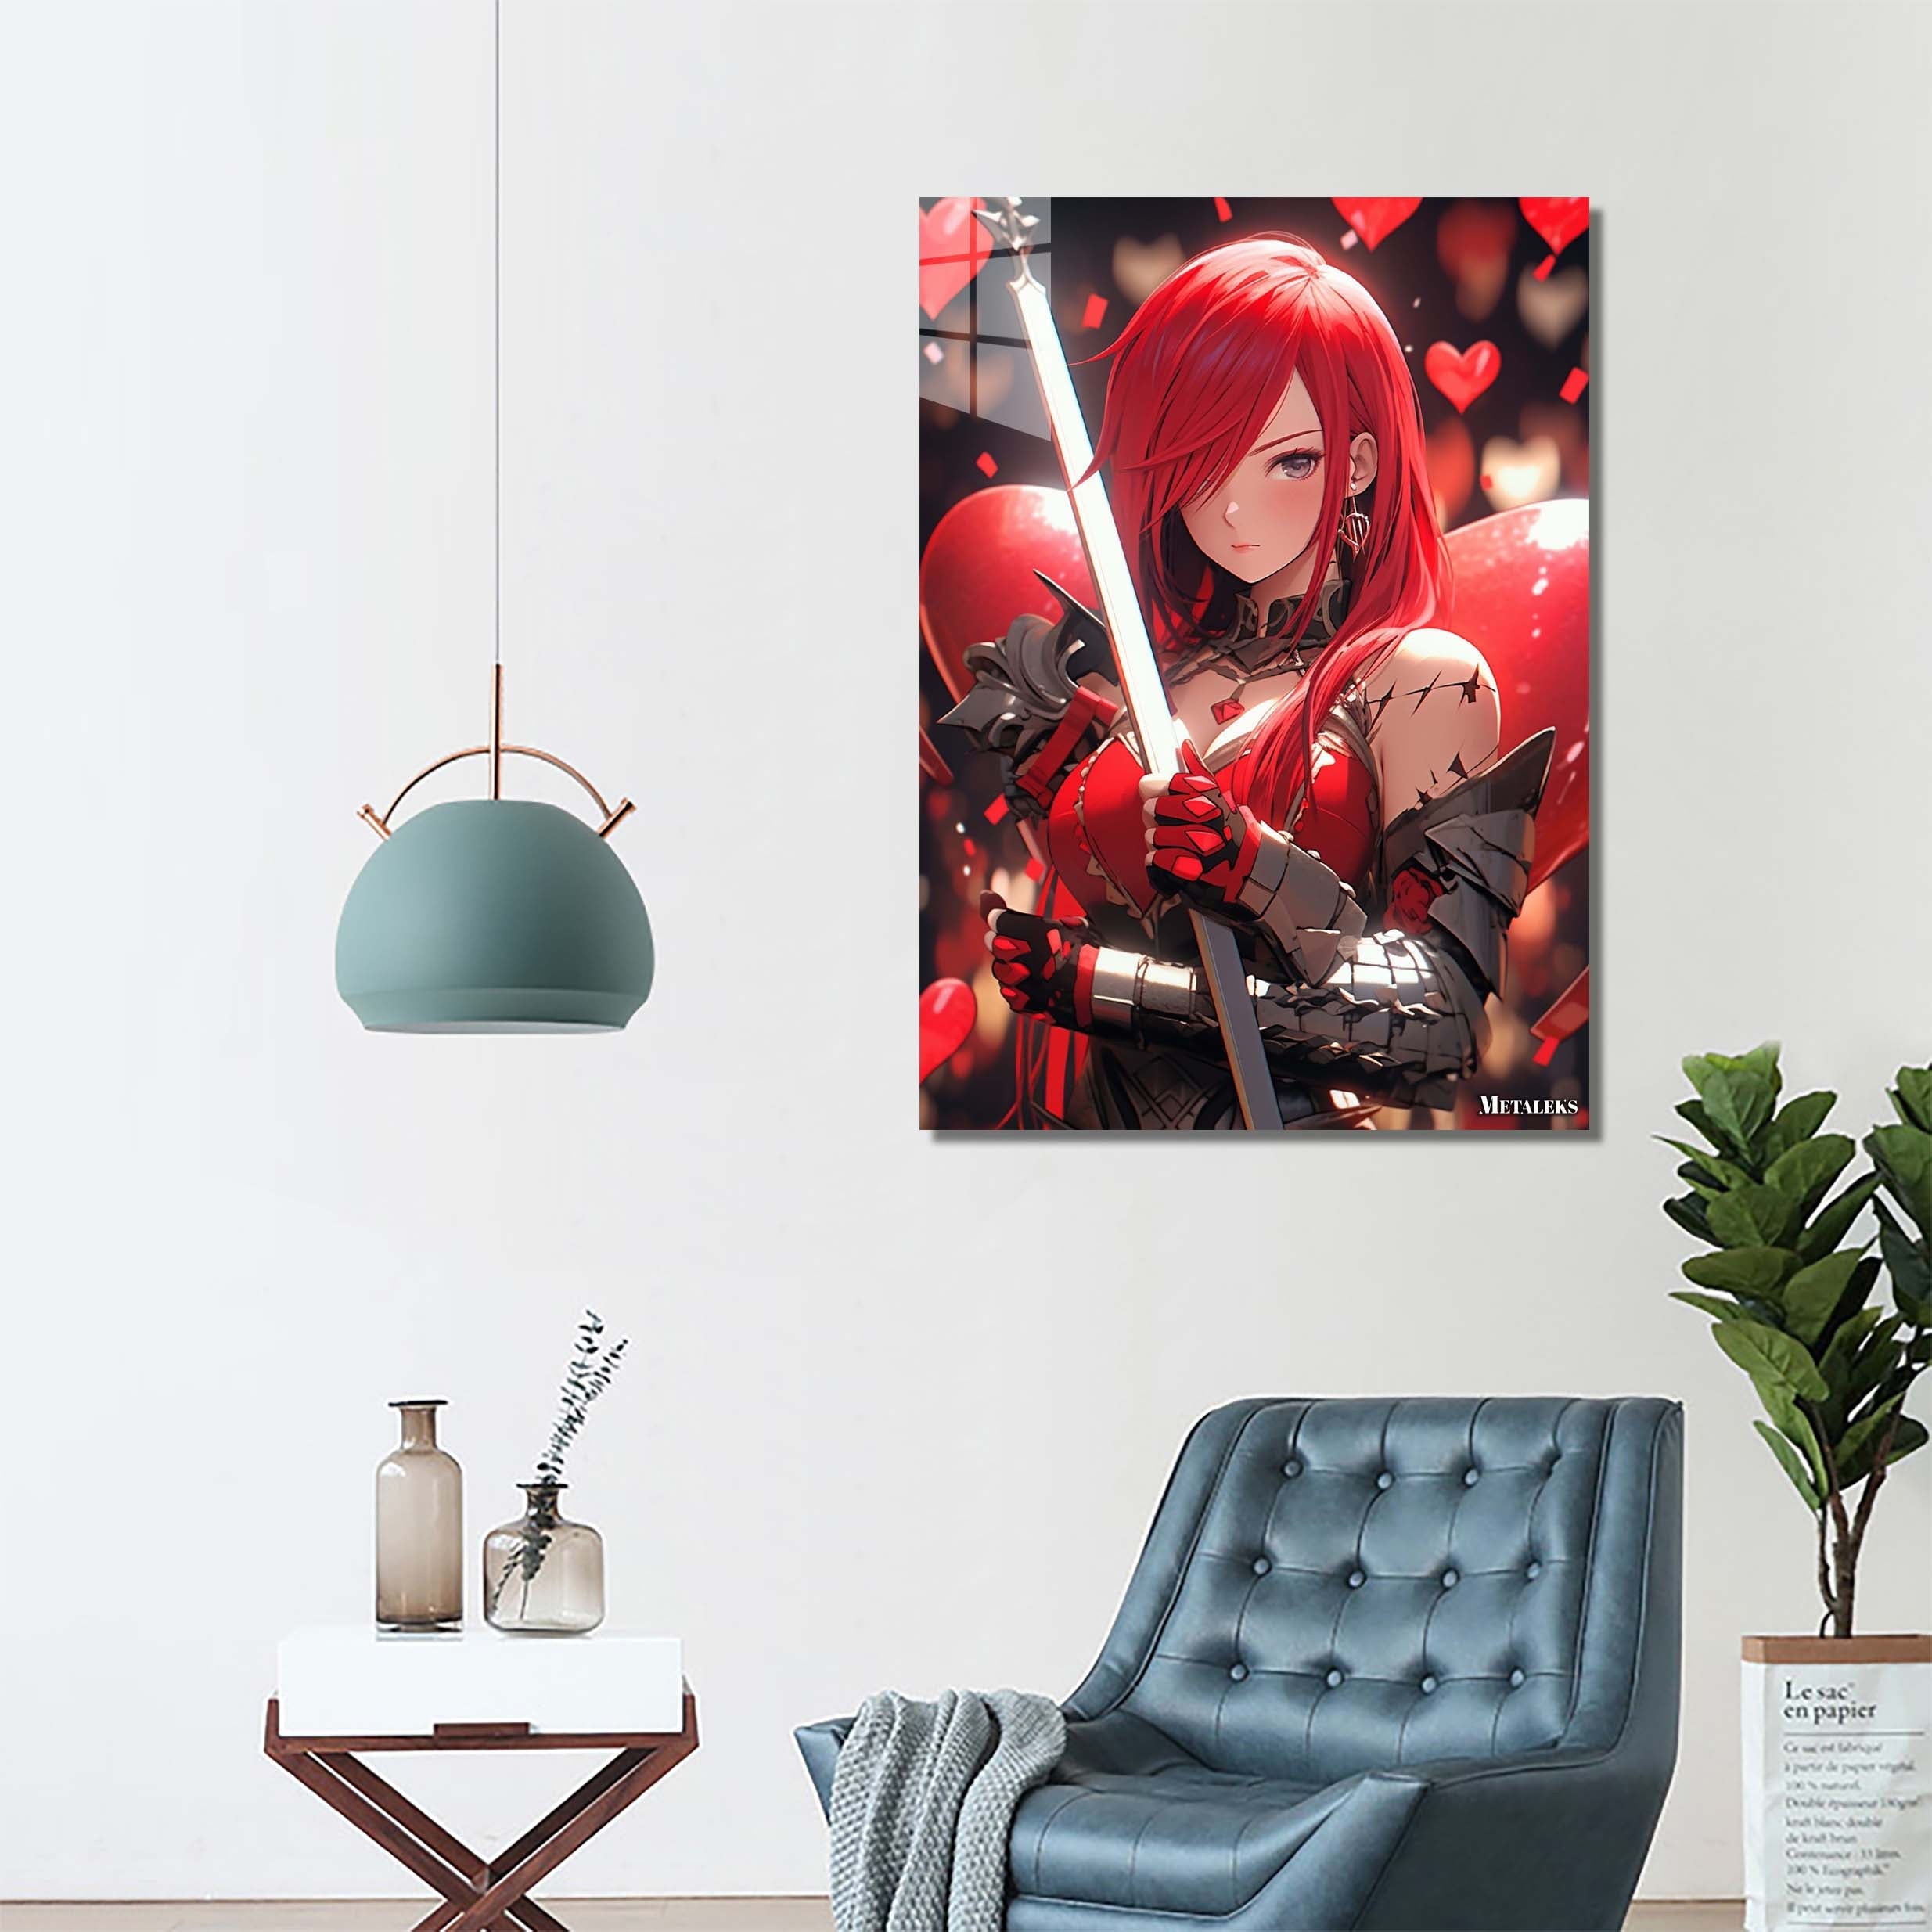 Scarlet Knight_ Erza's Unyielding Resolve-designed by @theanimecrossover